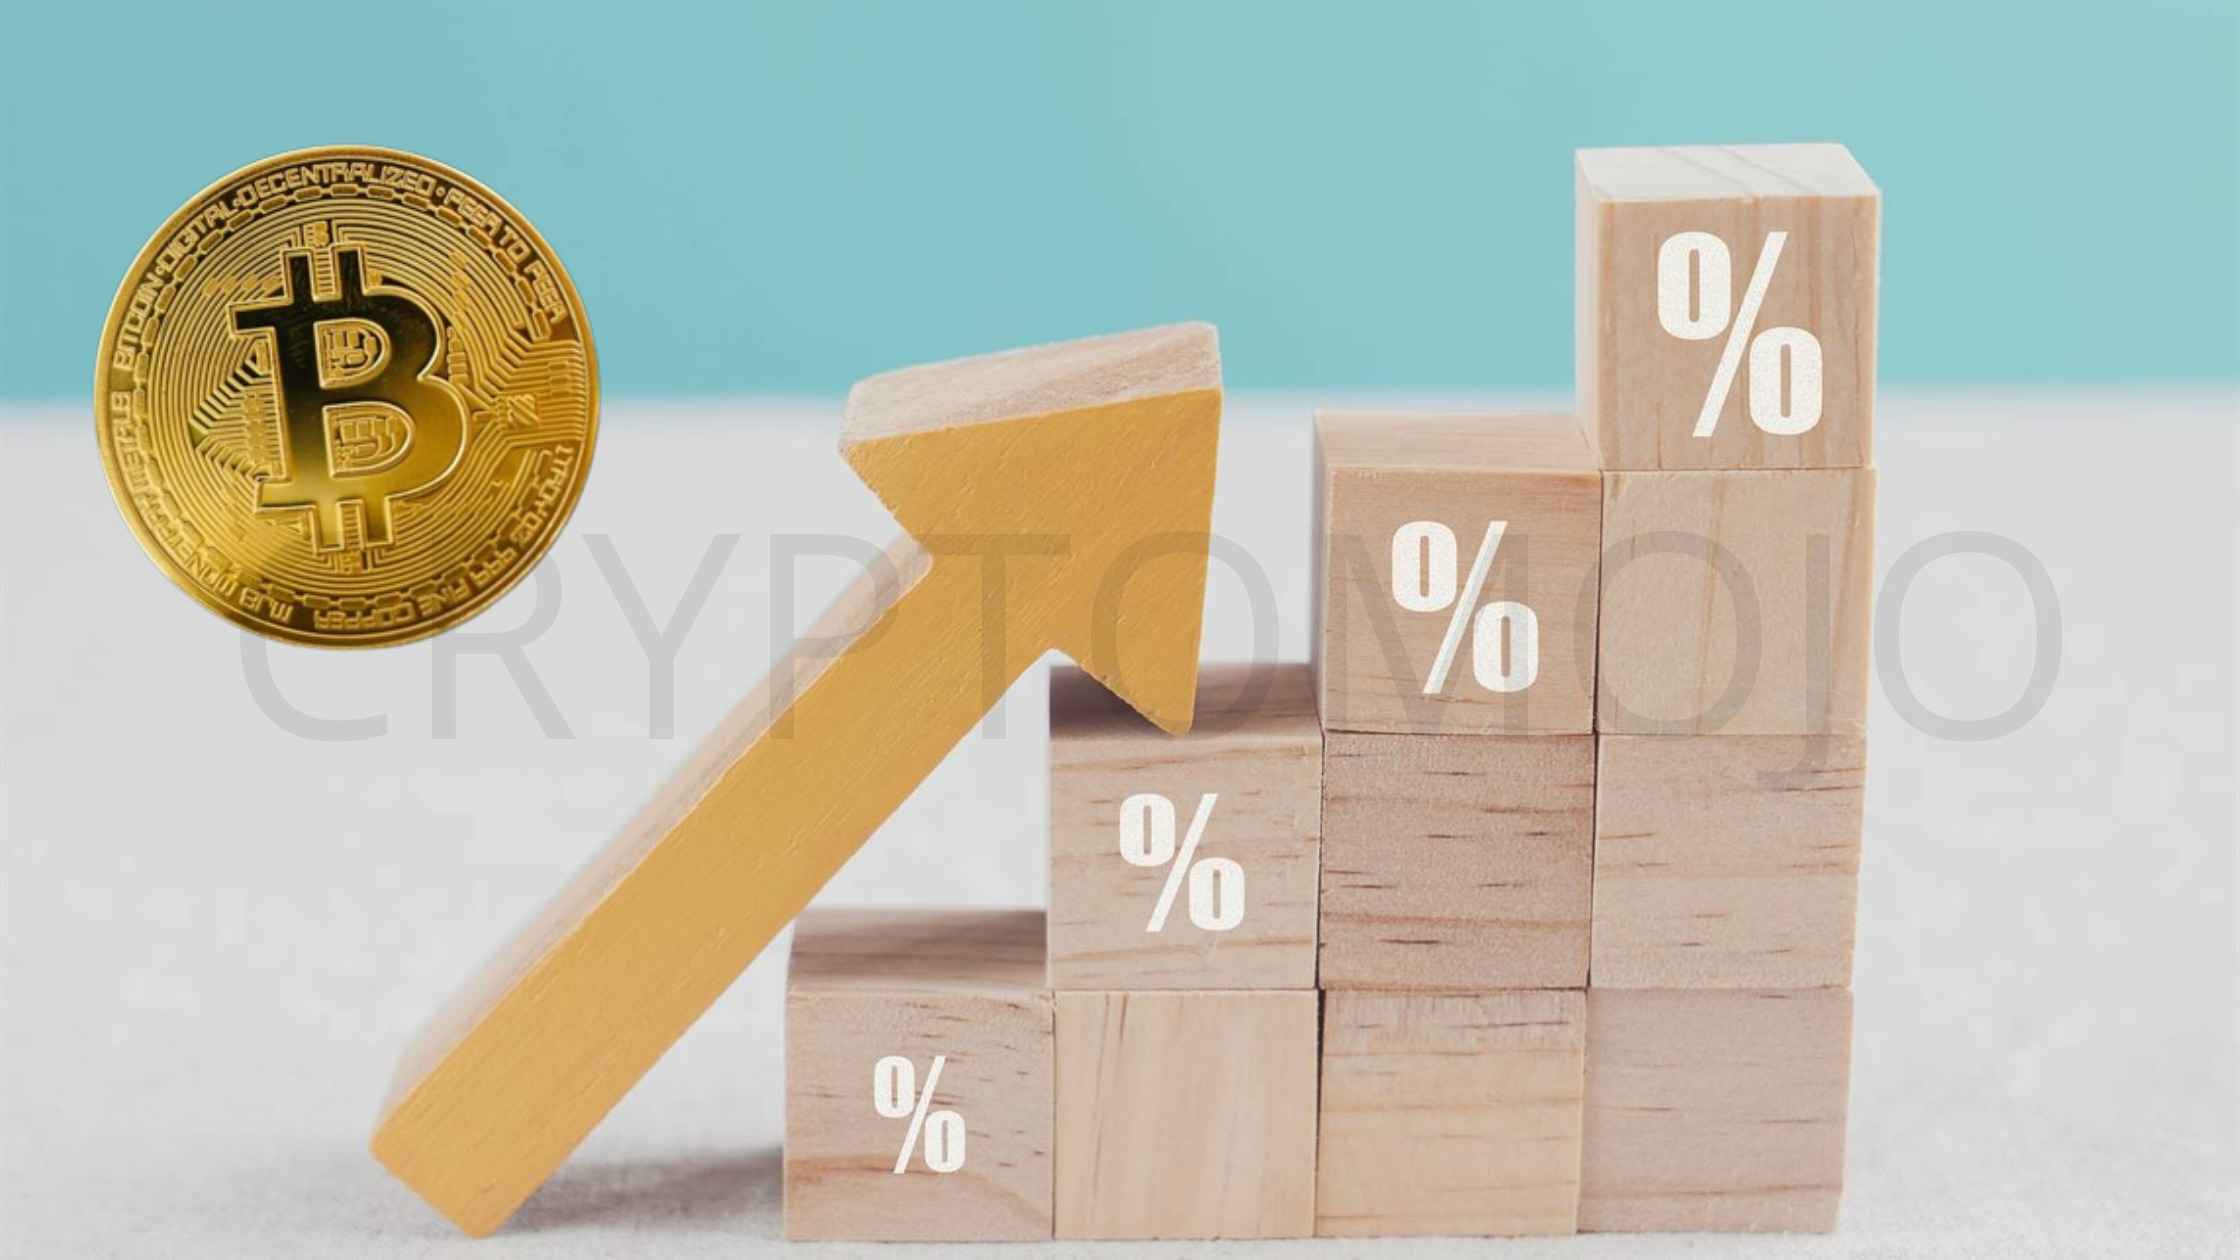 US Inflation Hit A 40-Year High How Will This Impact The Price Of Bitcoin